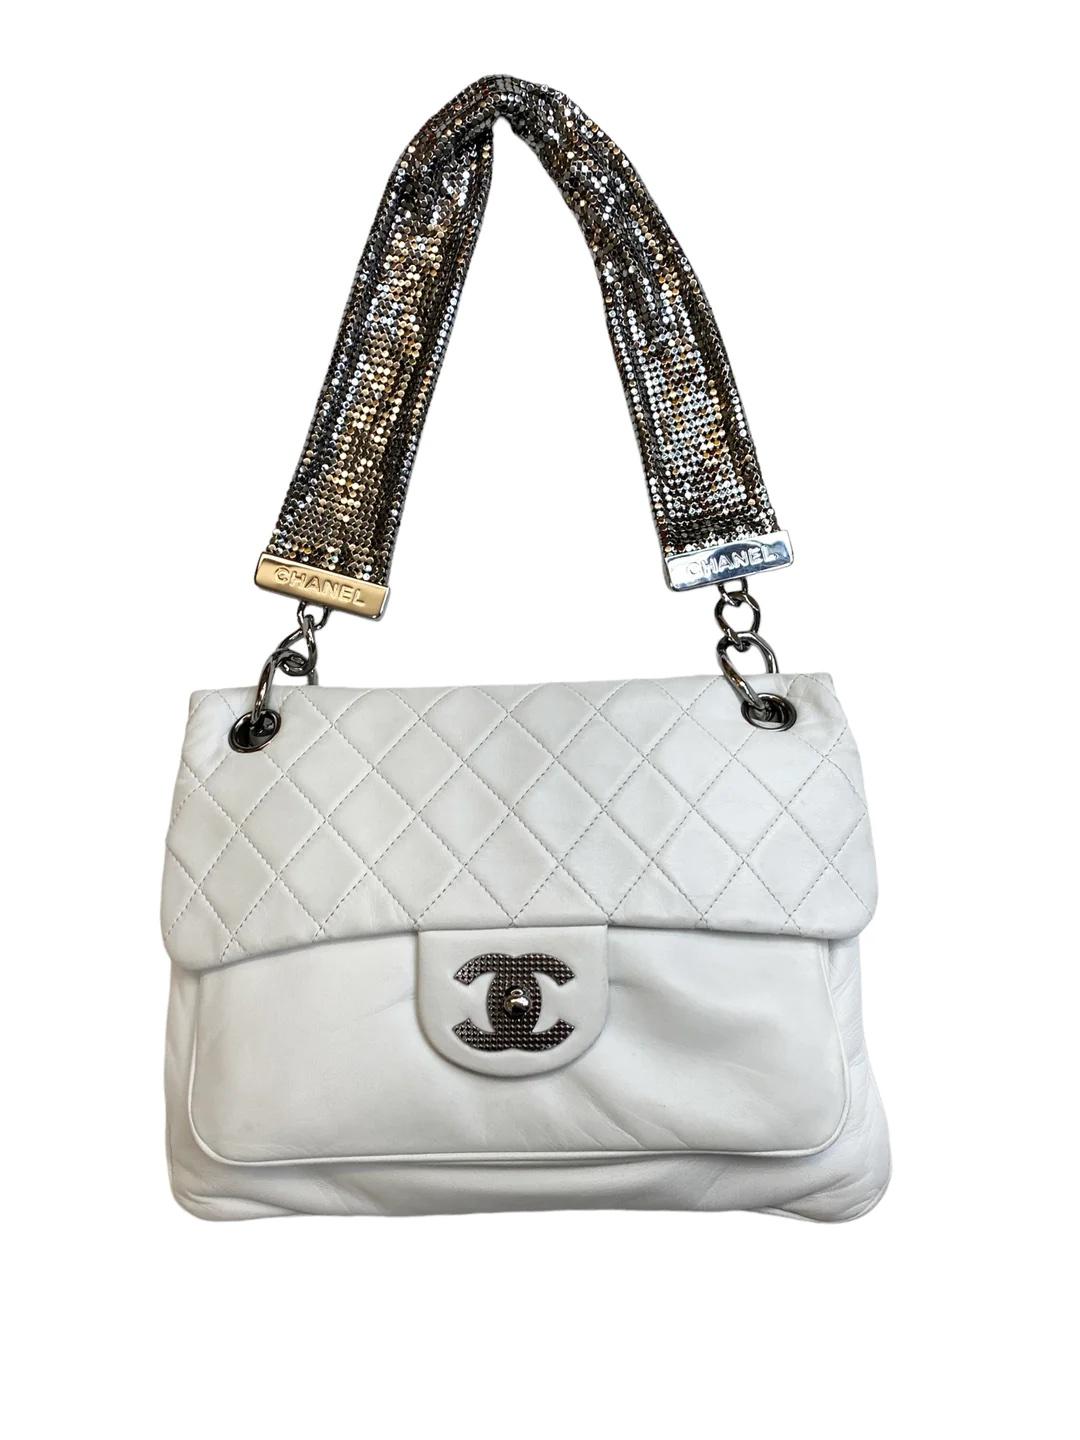 Chanel 2009 Metallic Mesh Limited Edition Soft Lambskin White Classic Flap Bag In Good Condition For Sale In Miami, FL